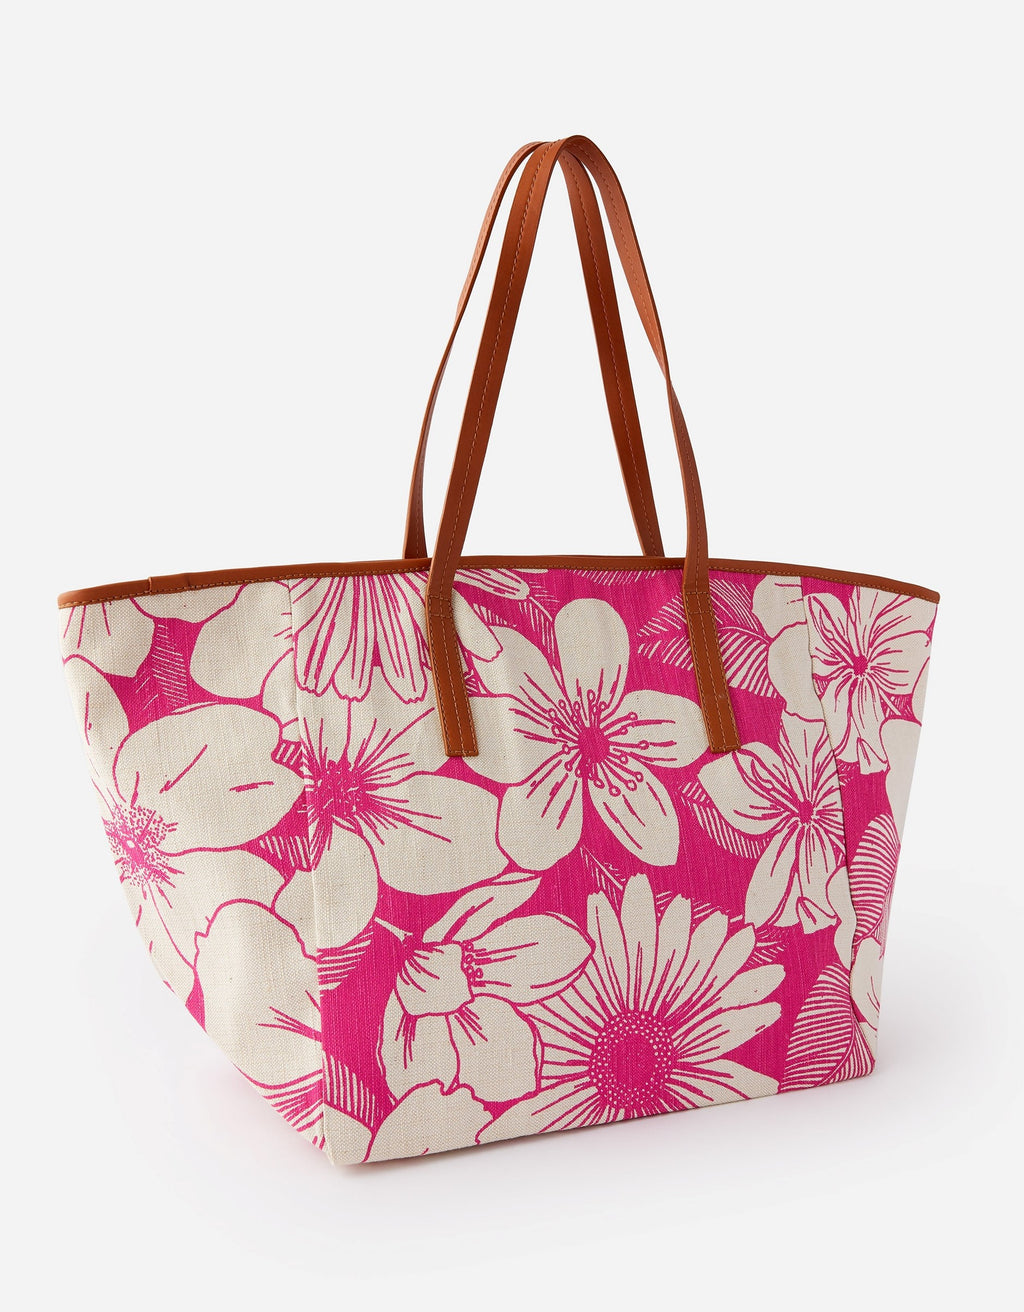 Pink floral printed beach bag shop India online cotton tote bag the beach company stylish beach bag